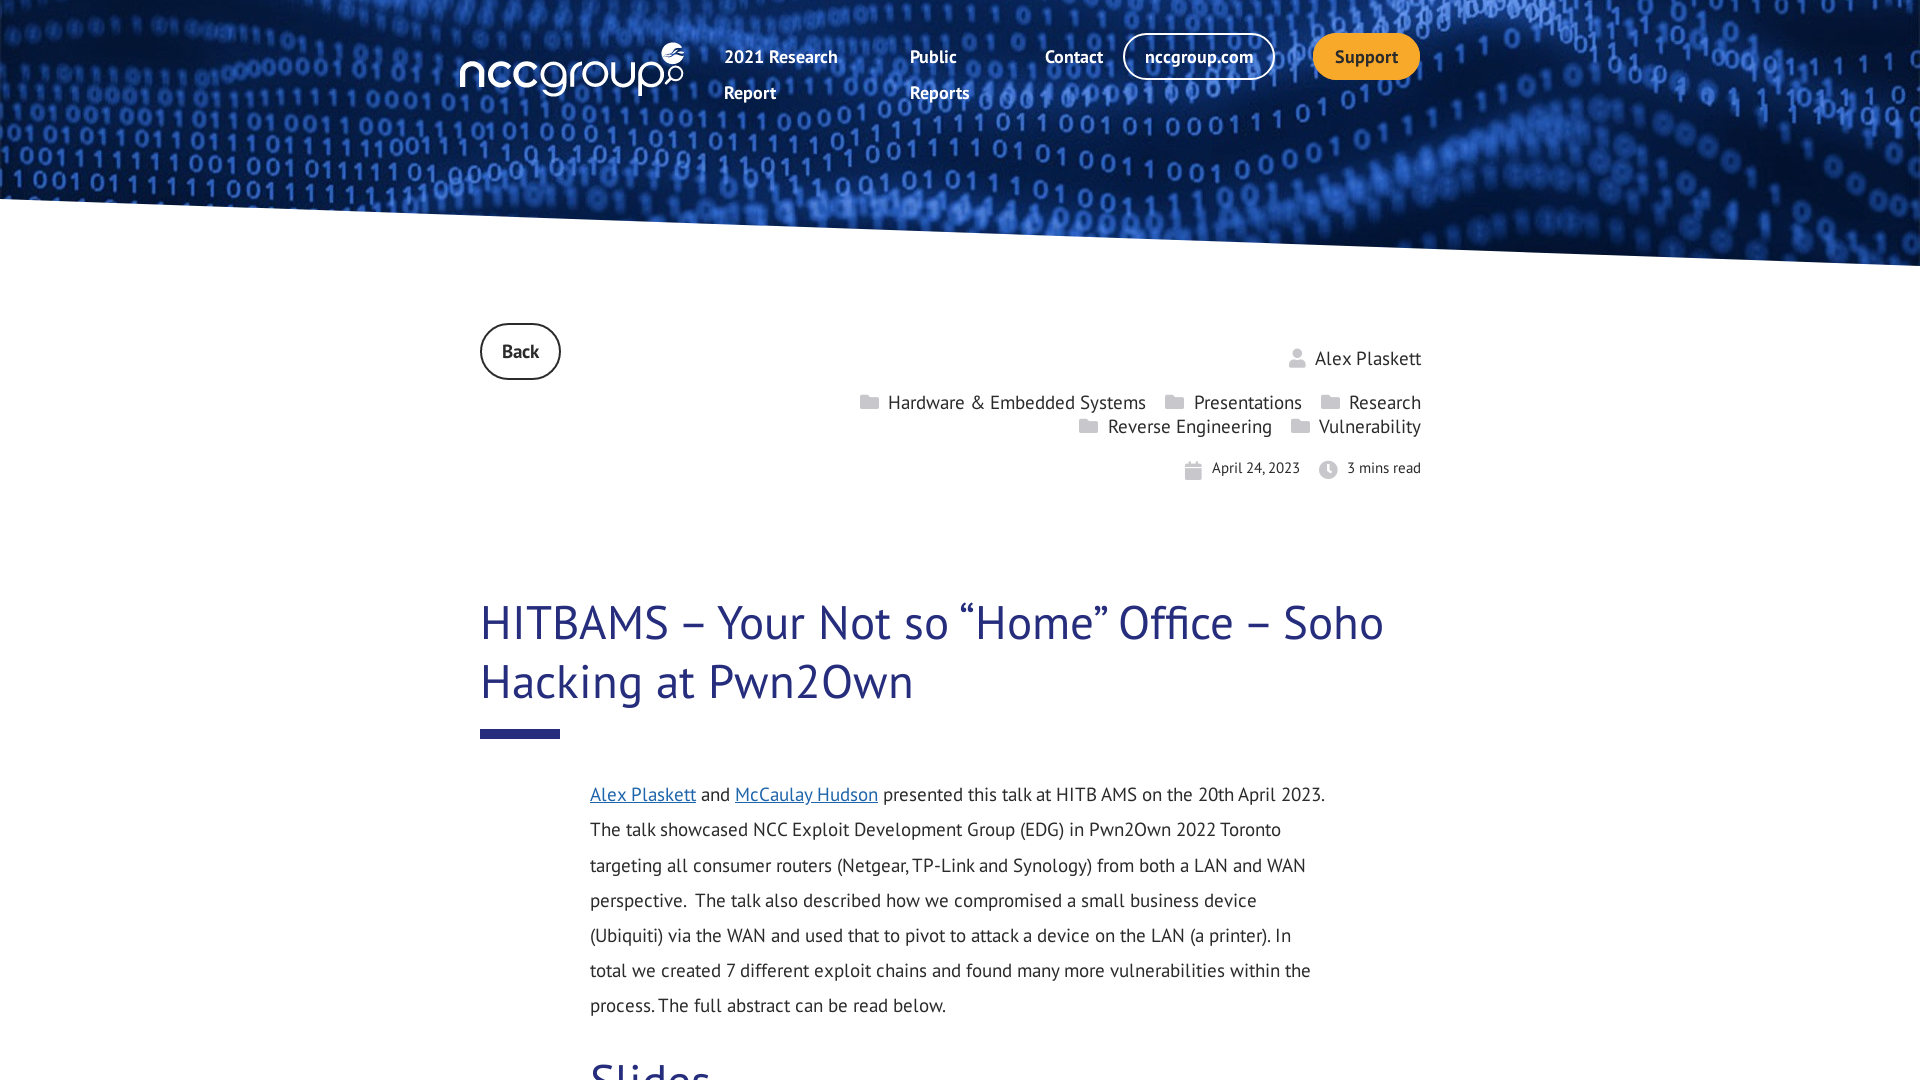 HITBAMS – Your Not so “Home” Office – Soho Hacking at Pwn2Own | NCC Group Research Blog | Making the world safer and more secure